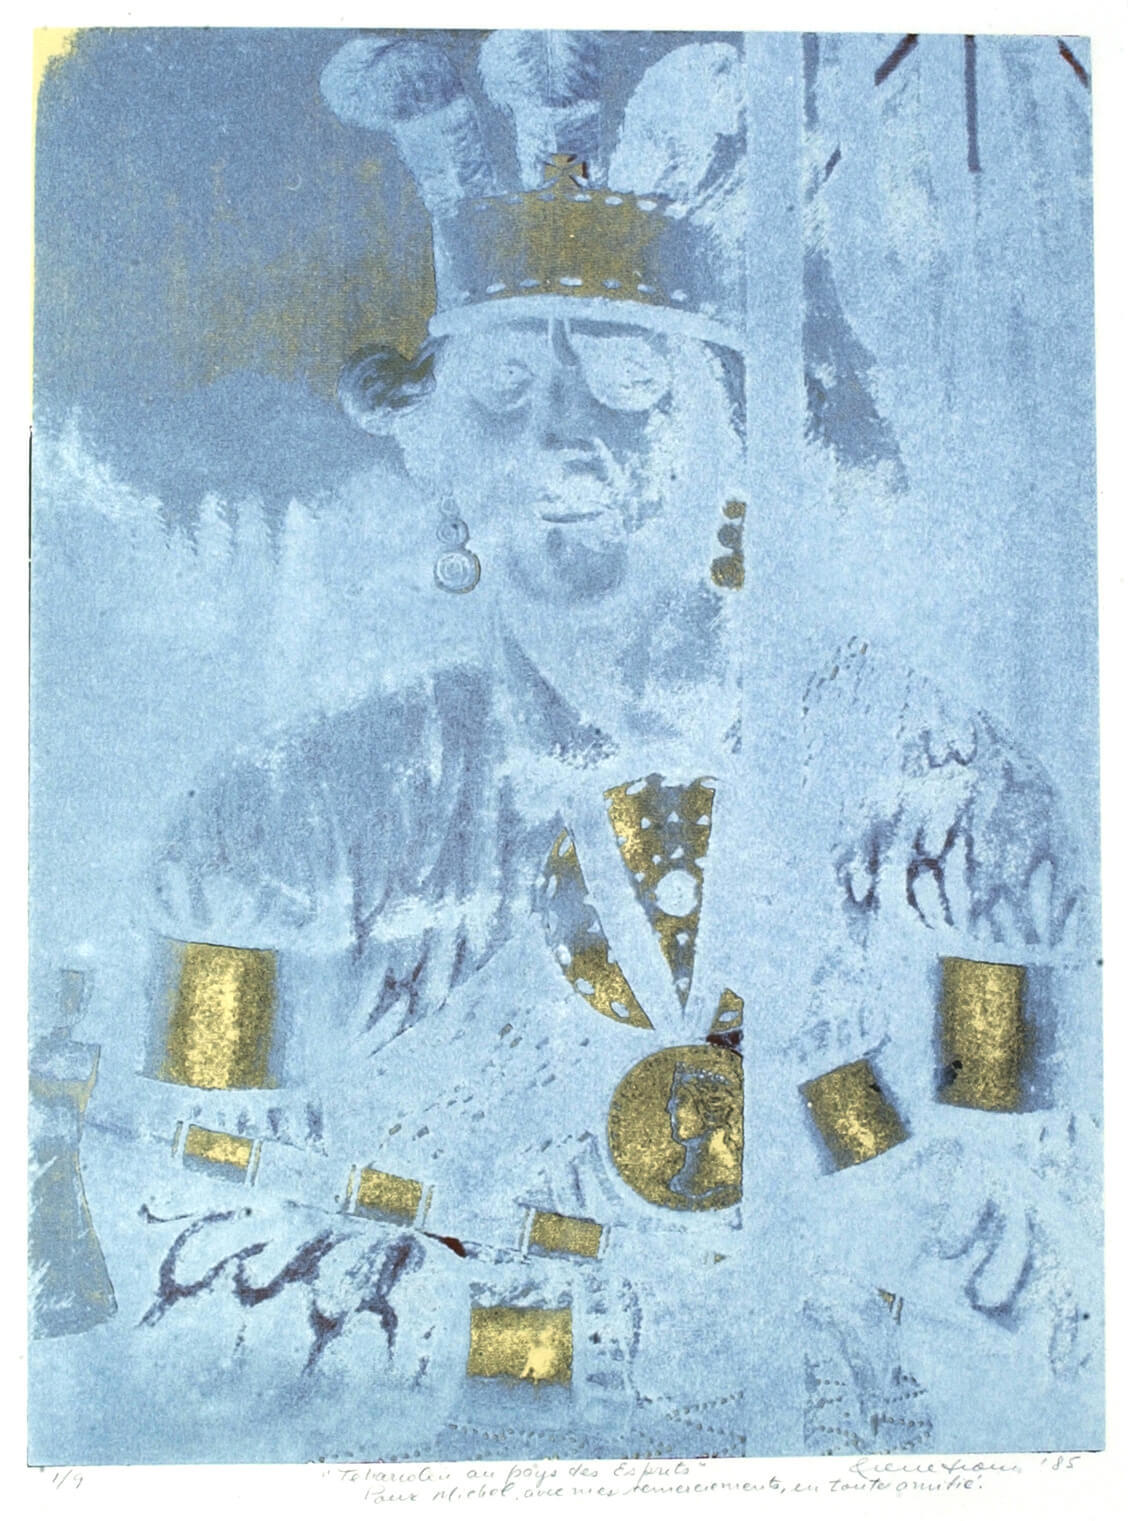 Art Canada Institute, Zacharie Vincent, Tehariolui in the Land of Spirits, 1985, by Pierre Sioui